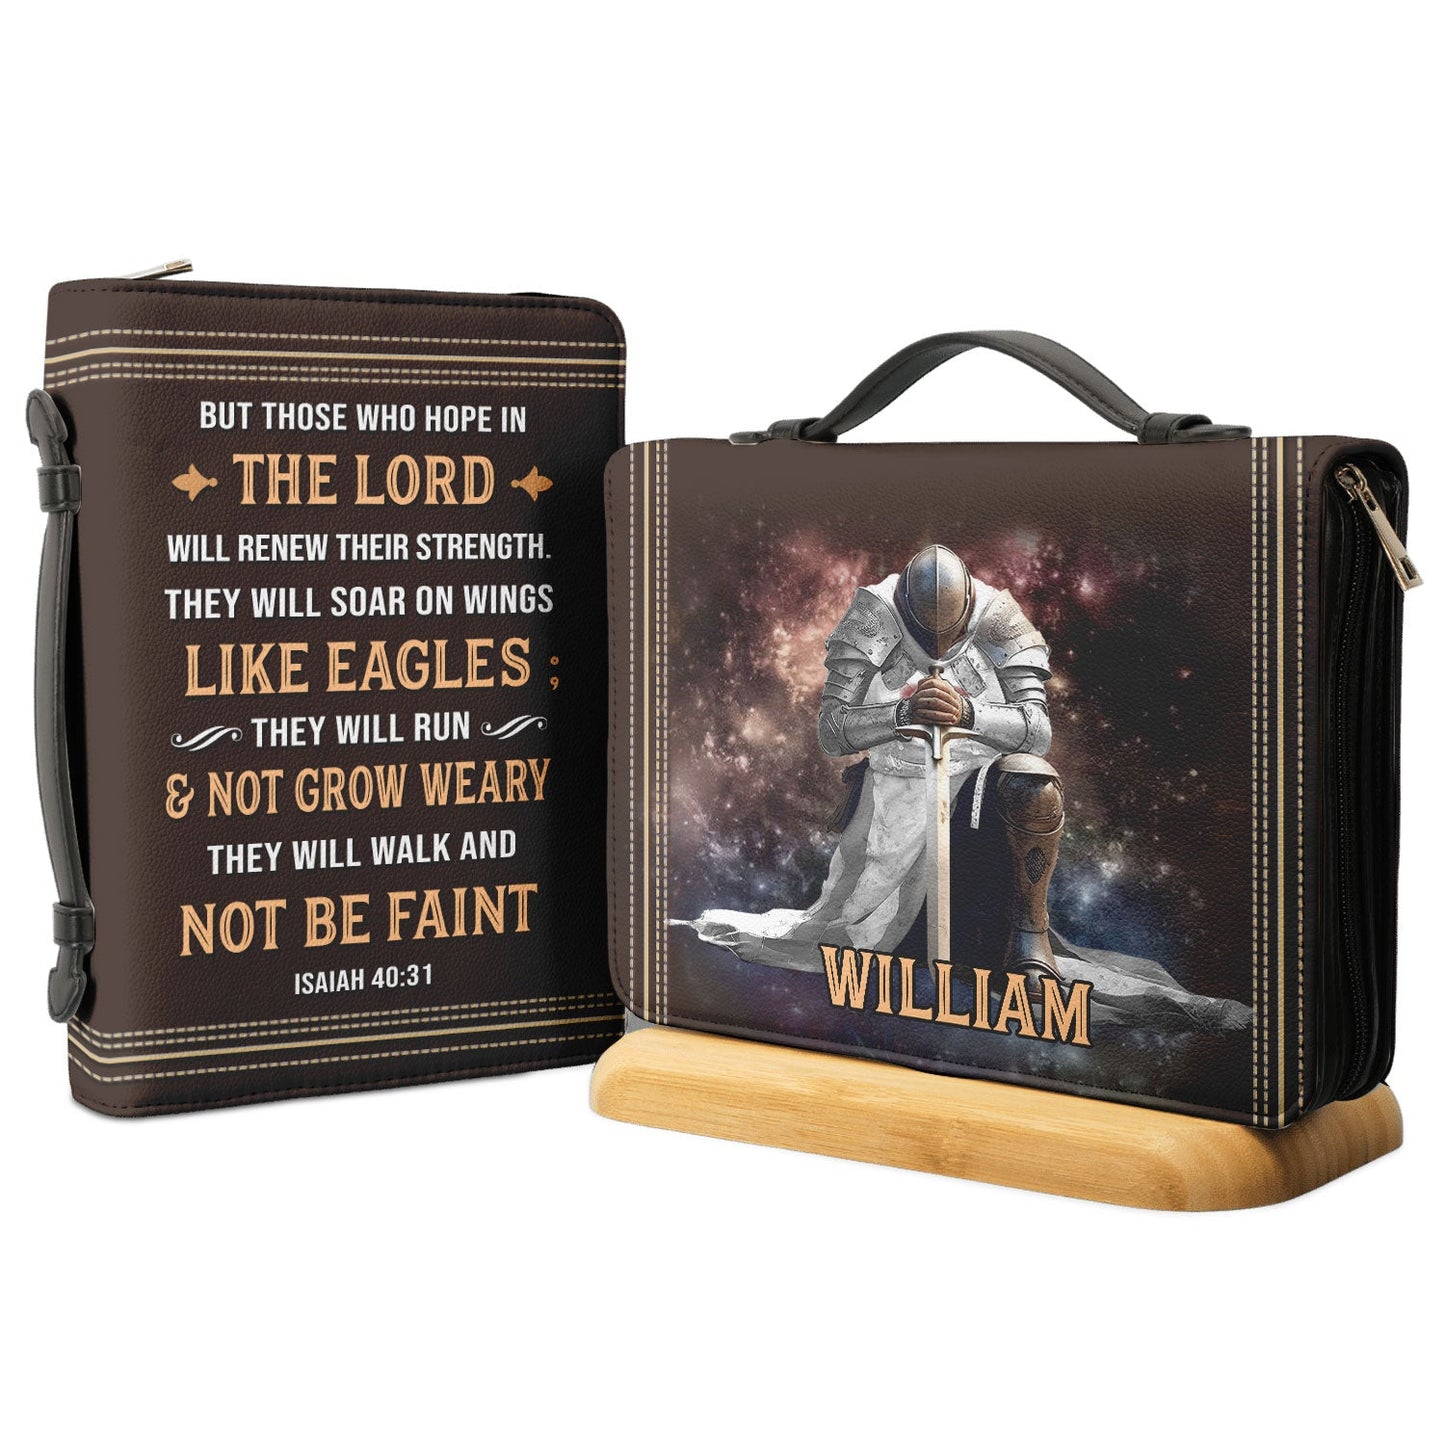 Personalized Bible Cover - But Those Who Hope In The Lord Will Renew Their Strength Isaiah 40 31 Knights Templar Bible Cover